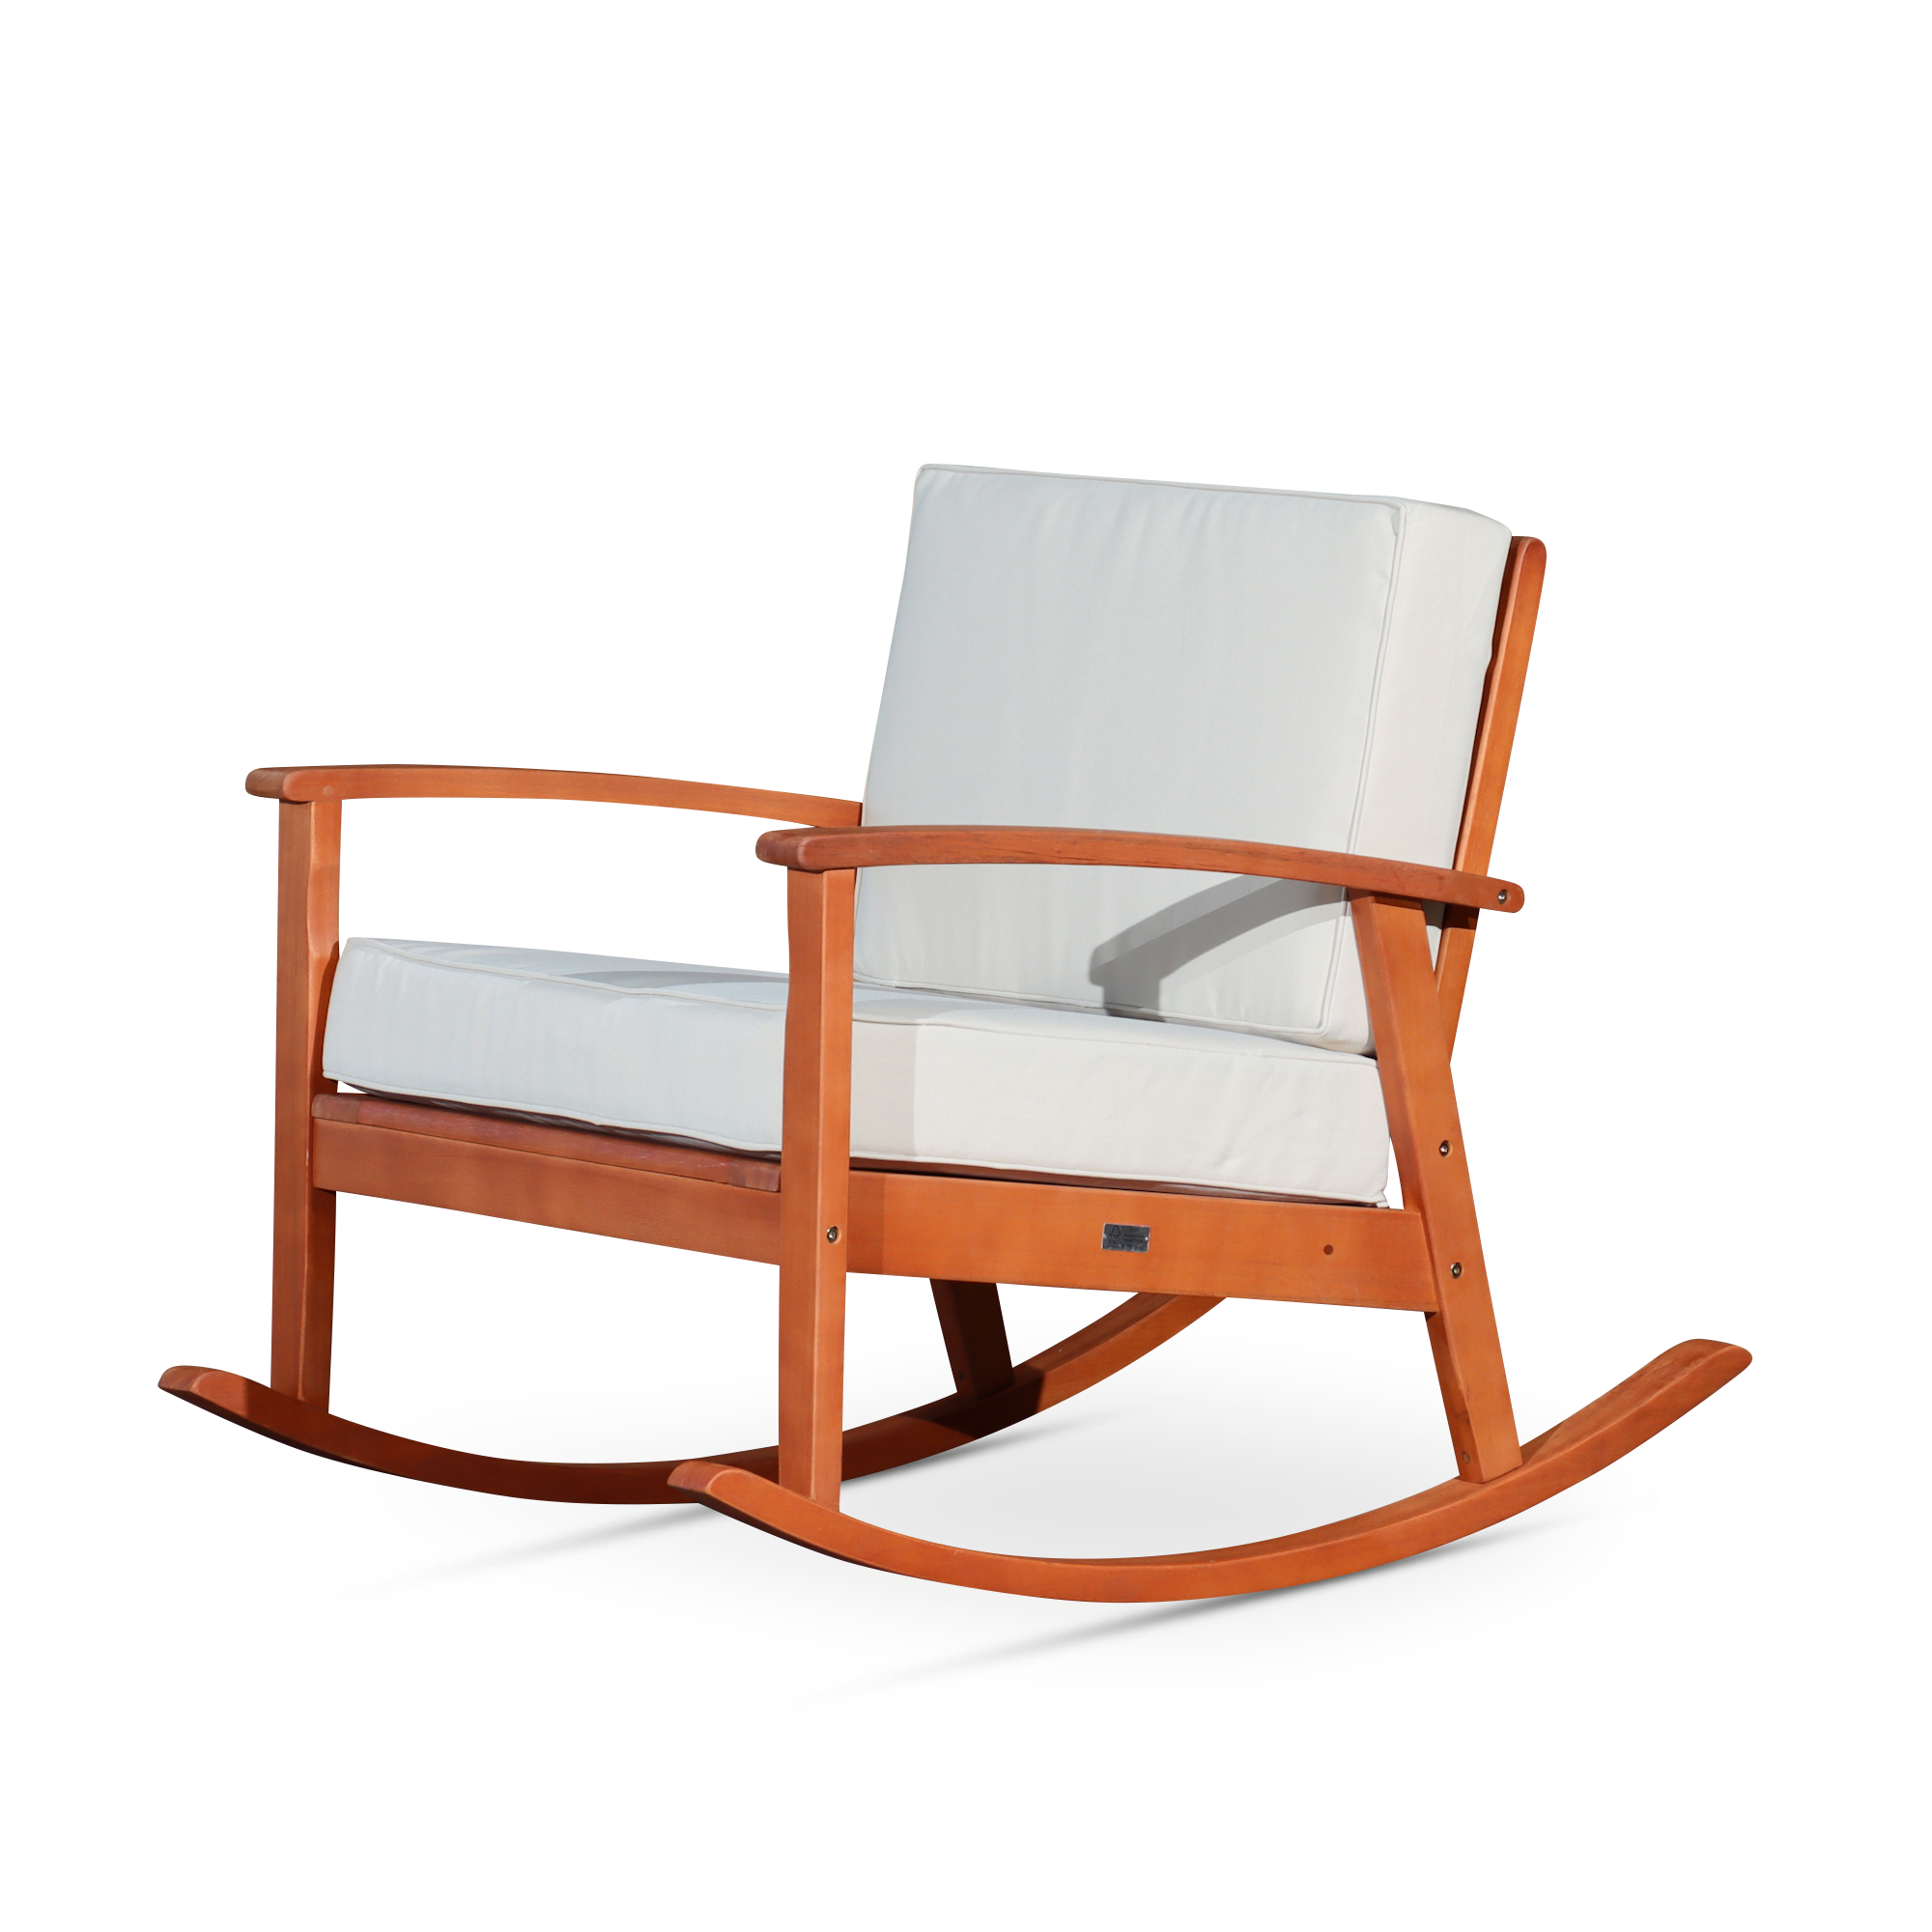 Outdoor-Rocking-Chair-with-Cushions,-Natural-Oil-Finish,-Sand-Cushions-Outdoor-Chairs